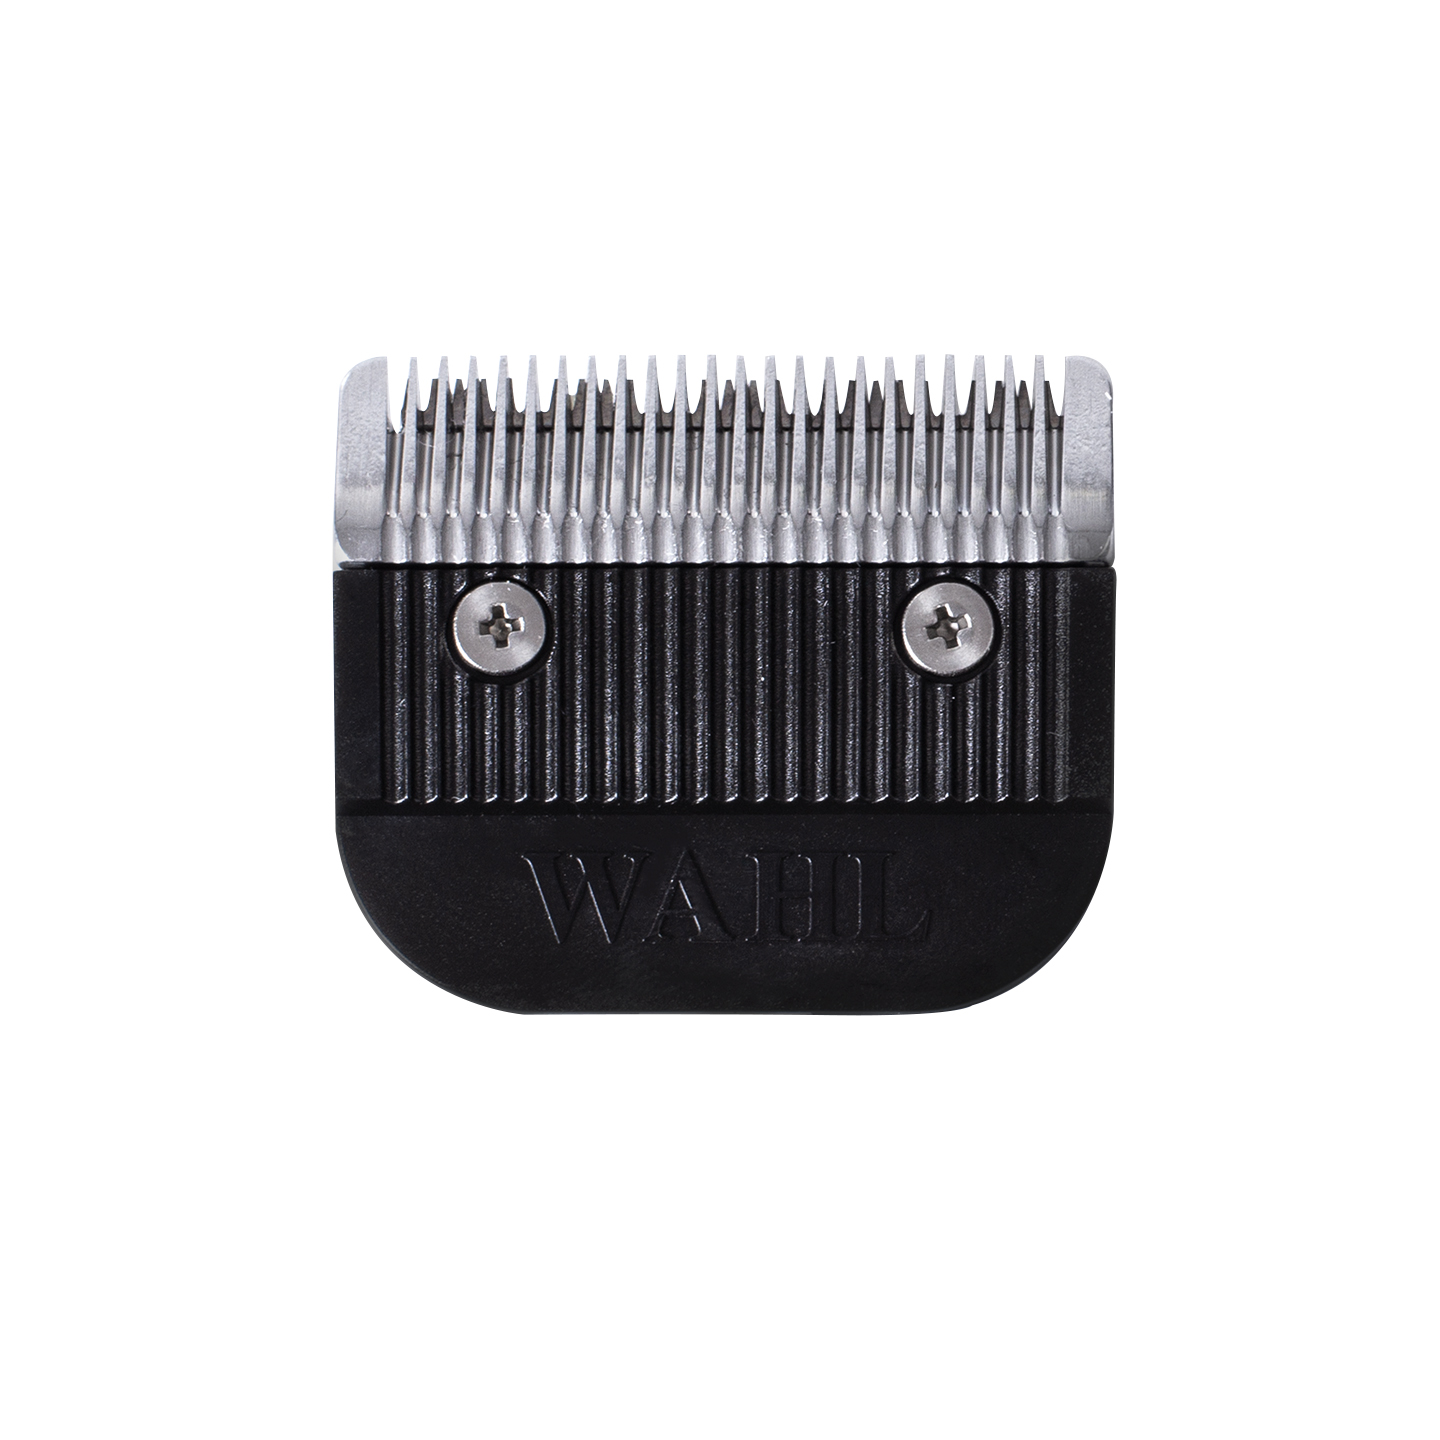 wahl trimmer head assembly